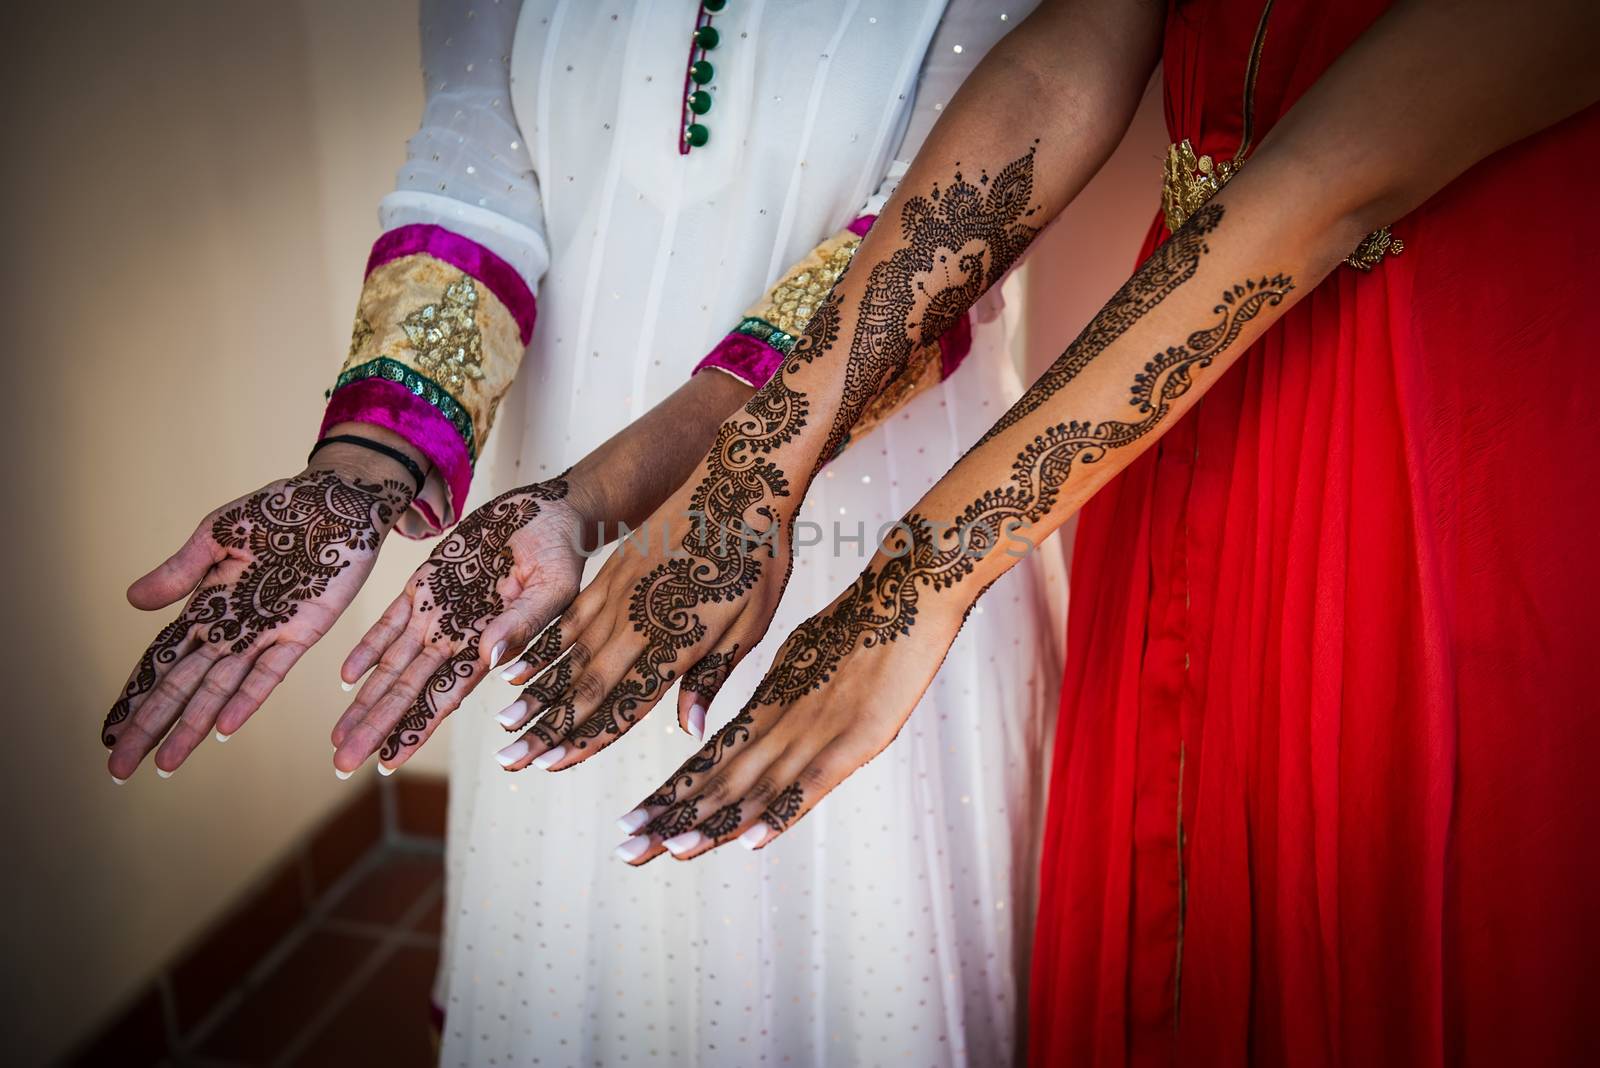  Henna Tattoos on hands by gregory21